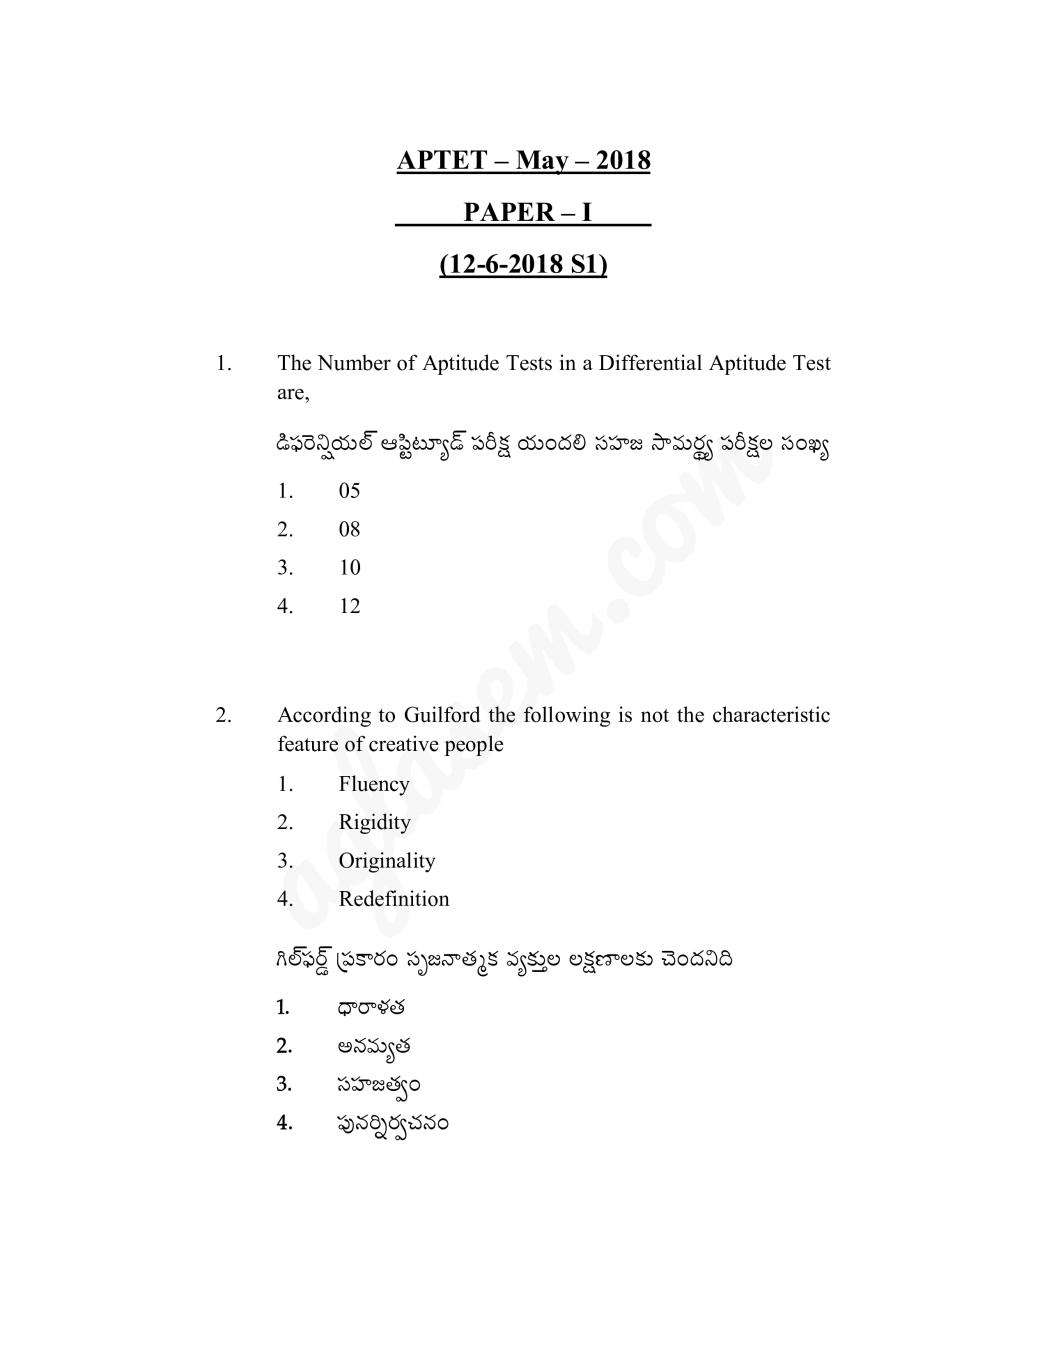 APTET Question Paper with Answers 12 Jun 2018 Paper 1 (Shift 1) - Page 1